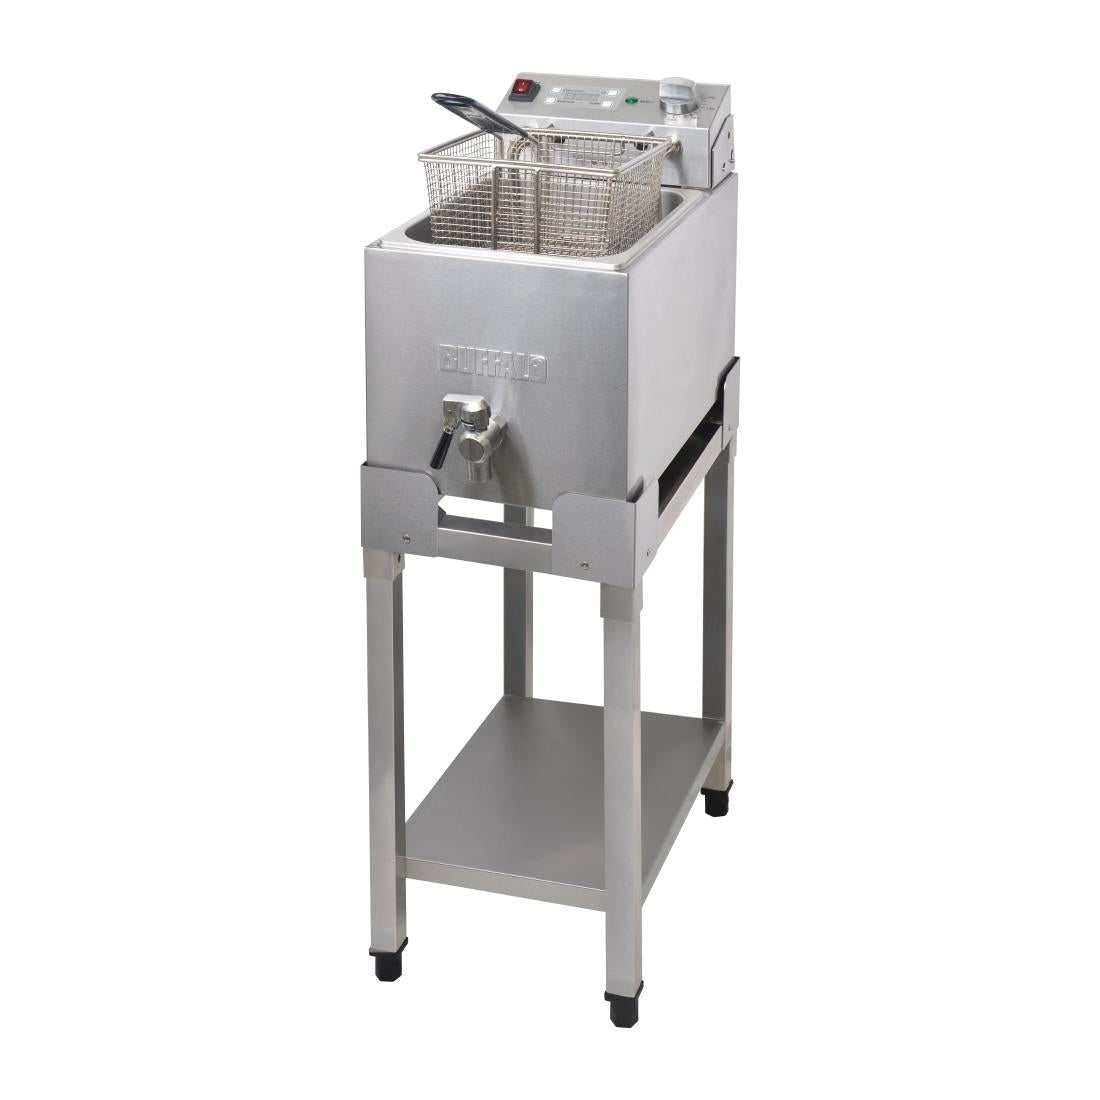 DF501 Buffalo Stand for Single Fryer (FC374 & FC376) JD Catering Equipment Solutions Ltd